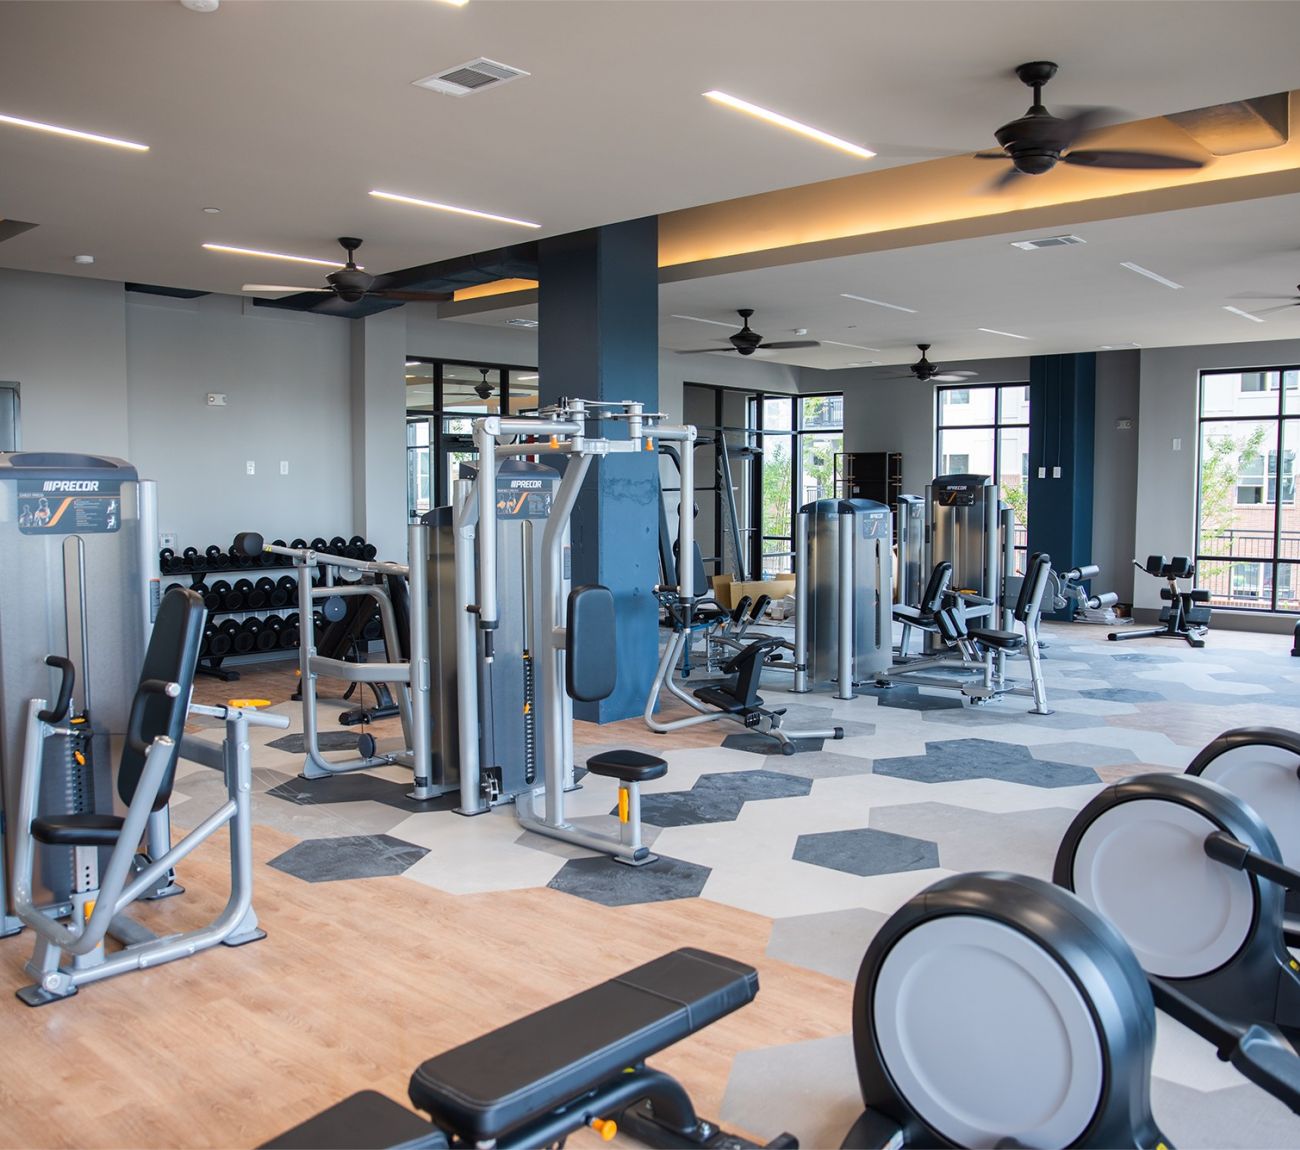 Expansive fitness center at McEwen apartments with lots of exercise equipment and machines